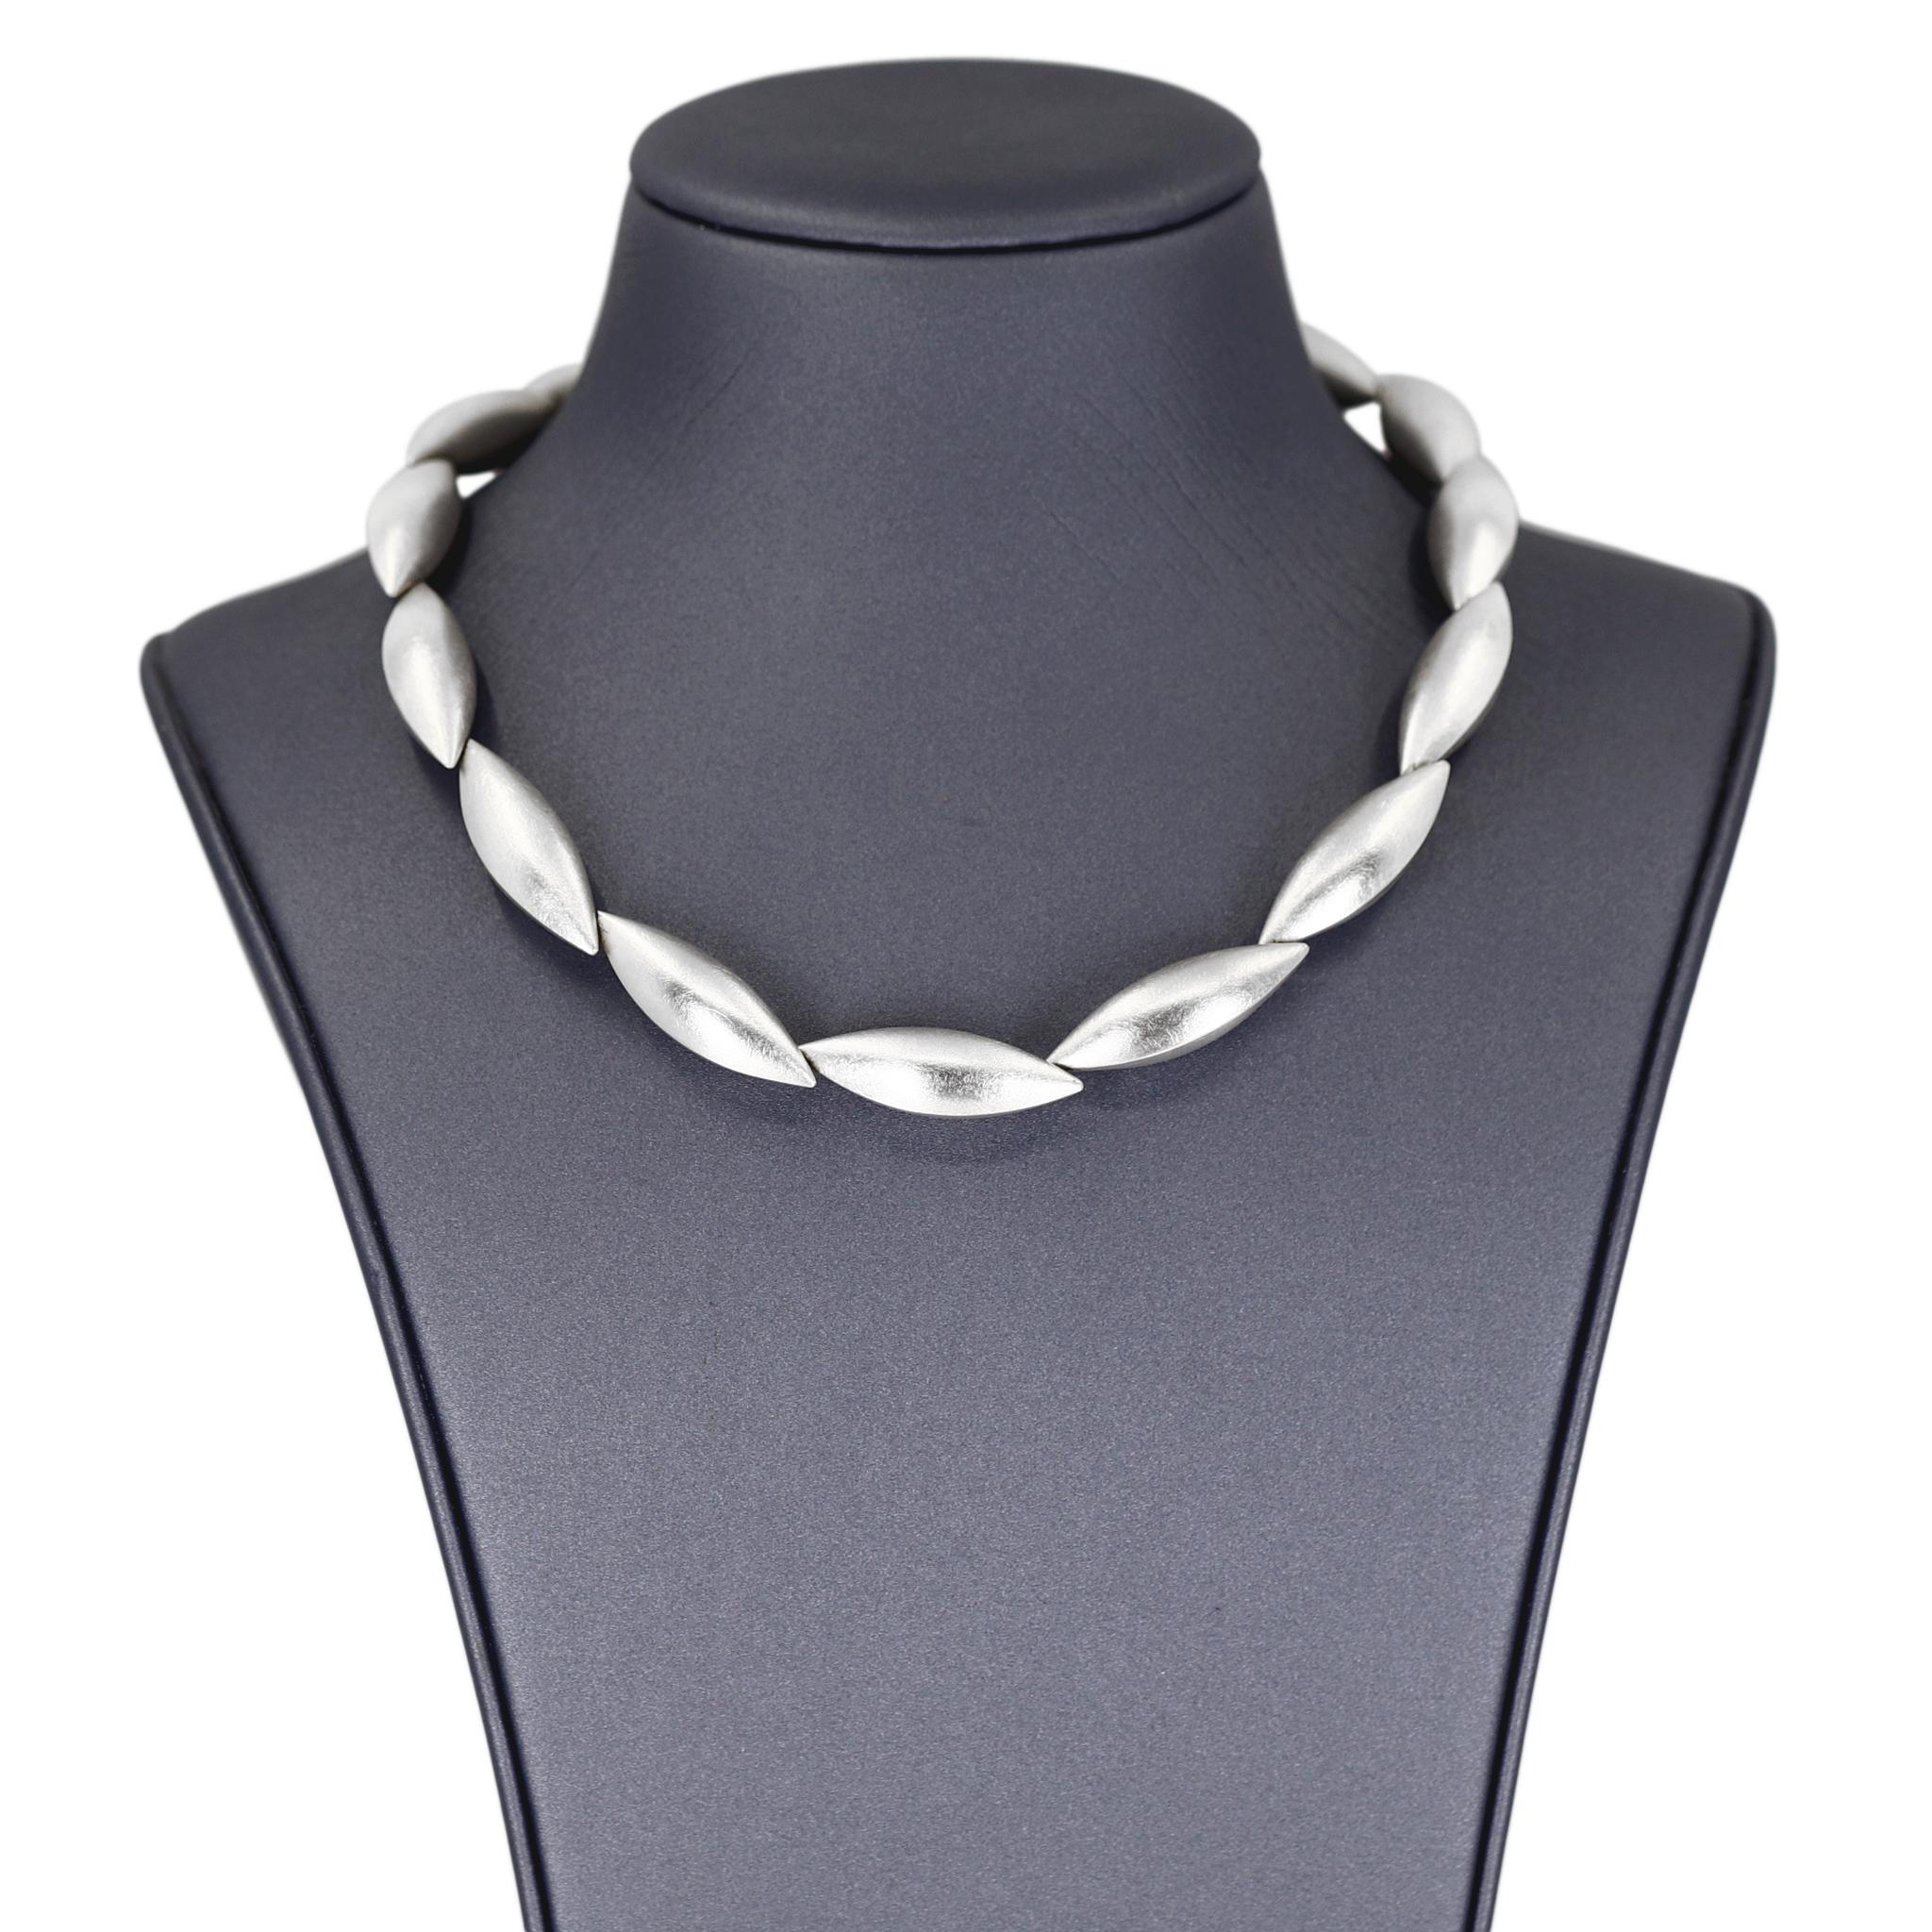 Cocoon Necklace handcrafted in Germany by acclaimed master metalsmith and jewelry maker Erich Zimmermann in signature, fine silver-brushed sterling silver, featuring fifteen hand-fabricated cocoon elements that interconnect to one another invisibly